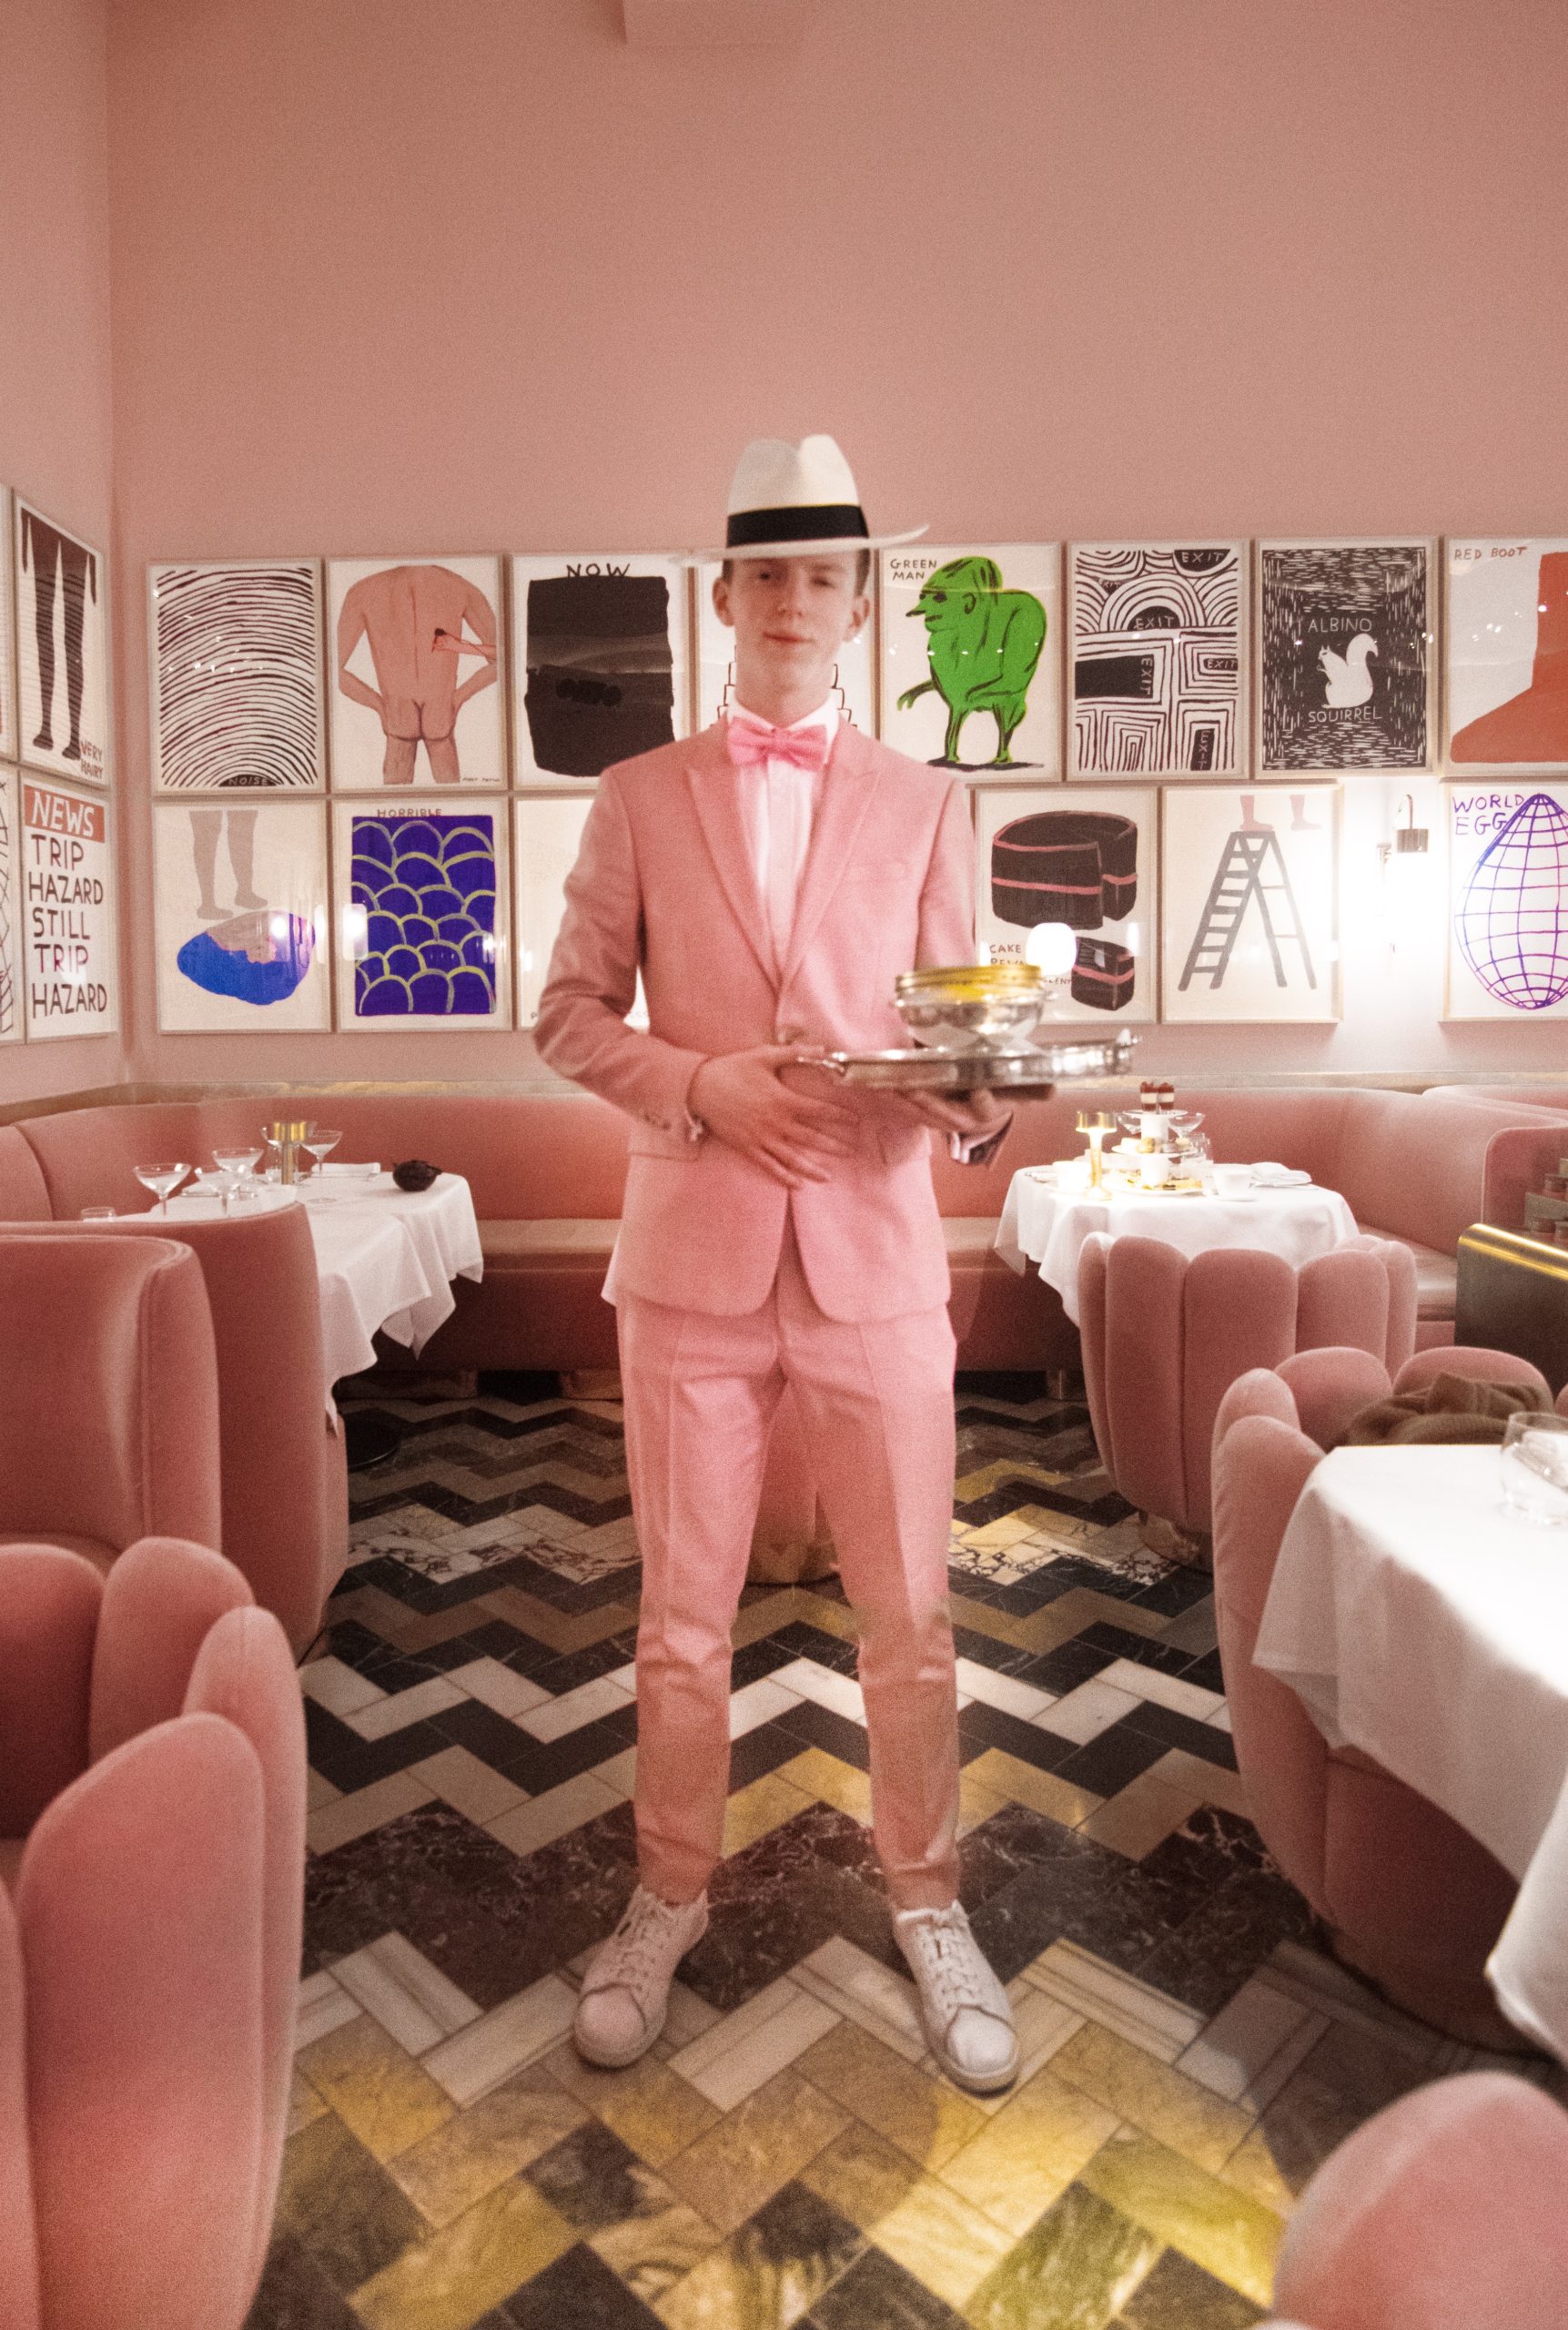 Sketch London  Quirky Restaurant With Pink Diner ForestThemed Bar   EggShaped Toilet Pods